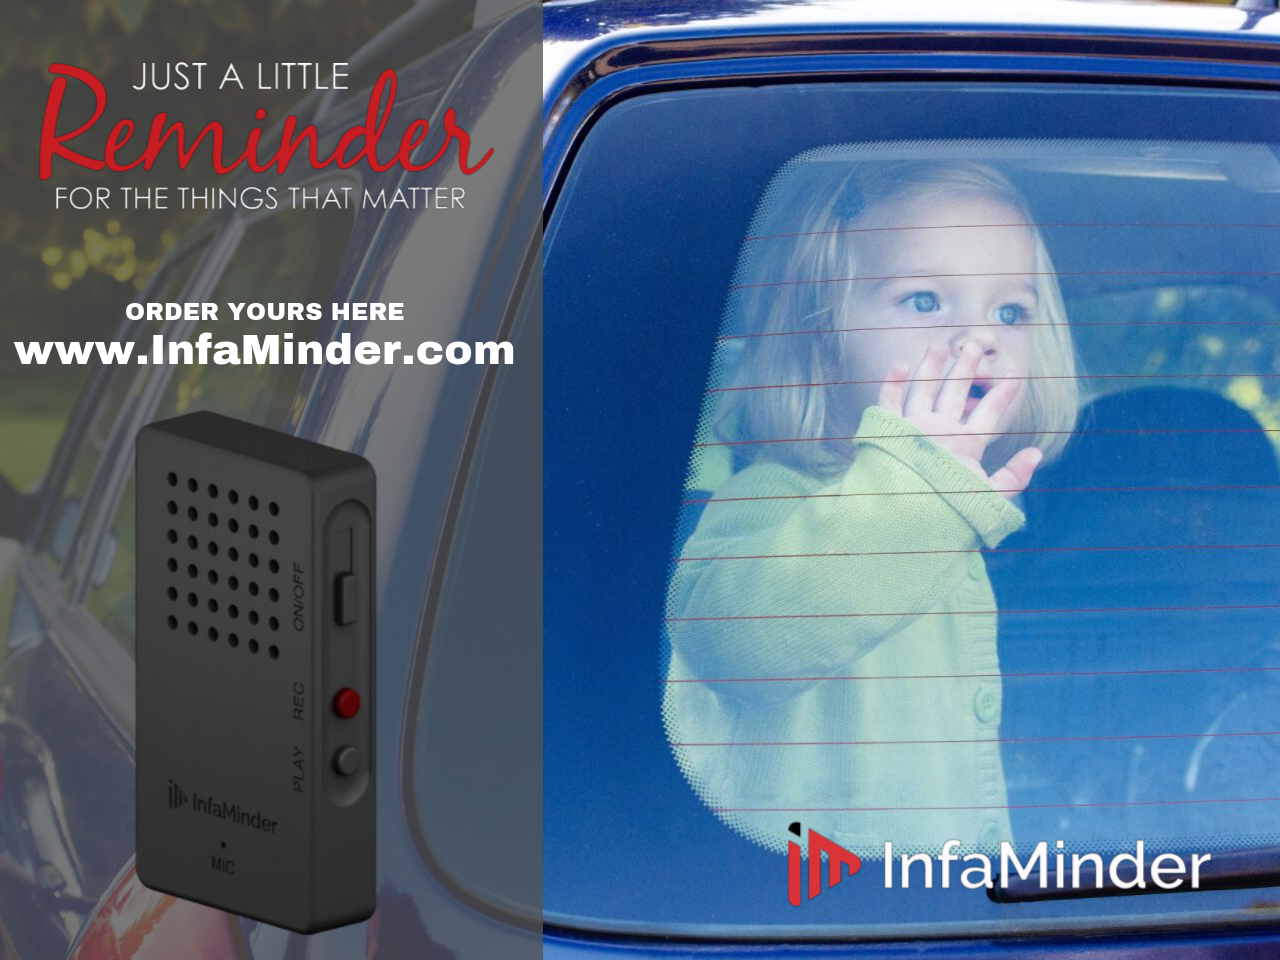 InfaMinder Corp Releases New Car Device that Saves Lives of Children and Pets